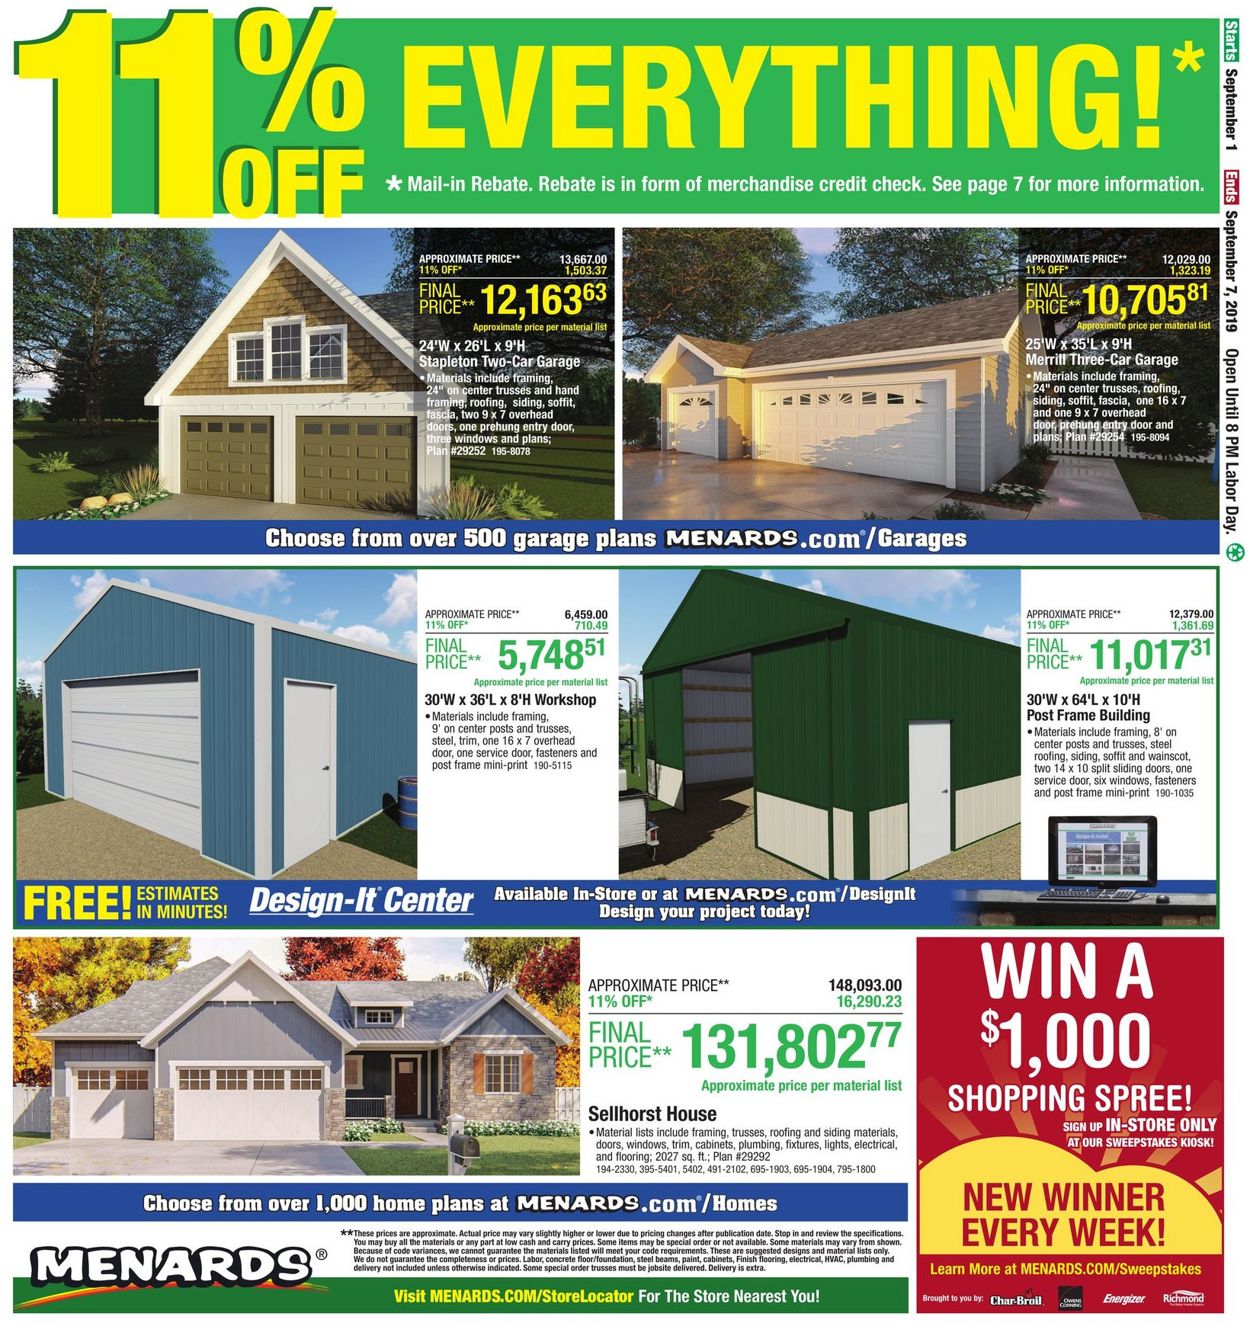 Menards Current weekly ad 09/01 - 09/07/2019 [9] - 0